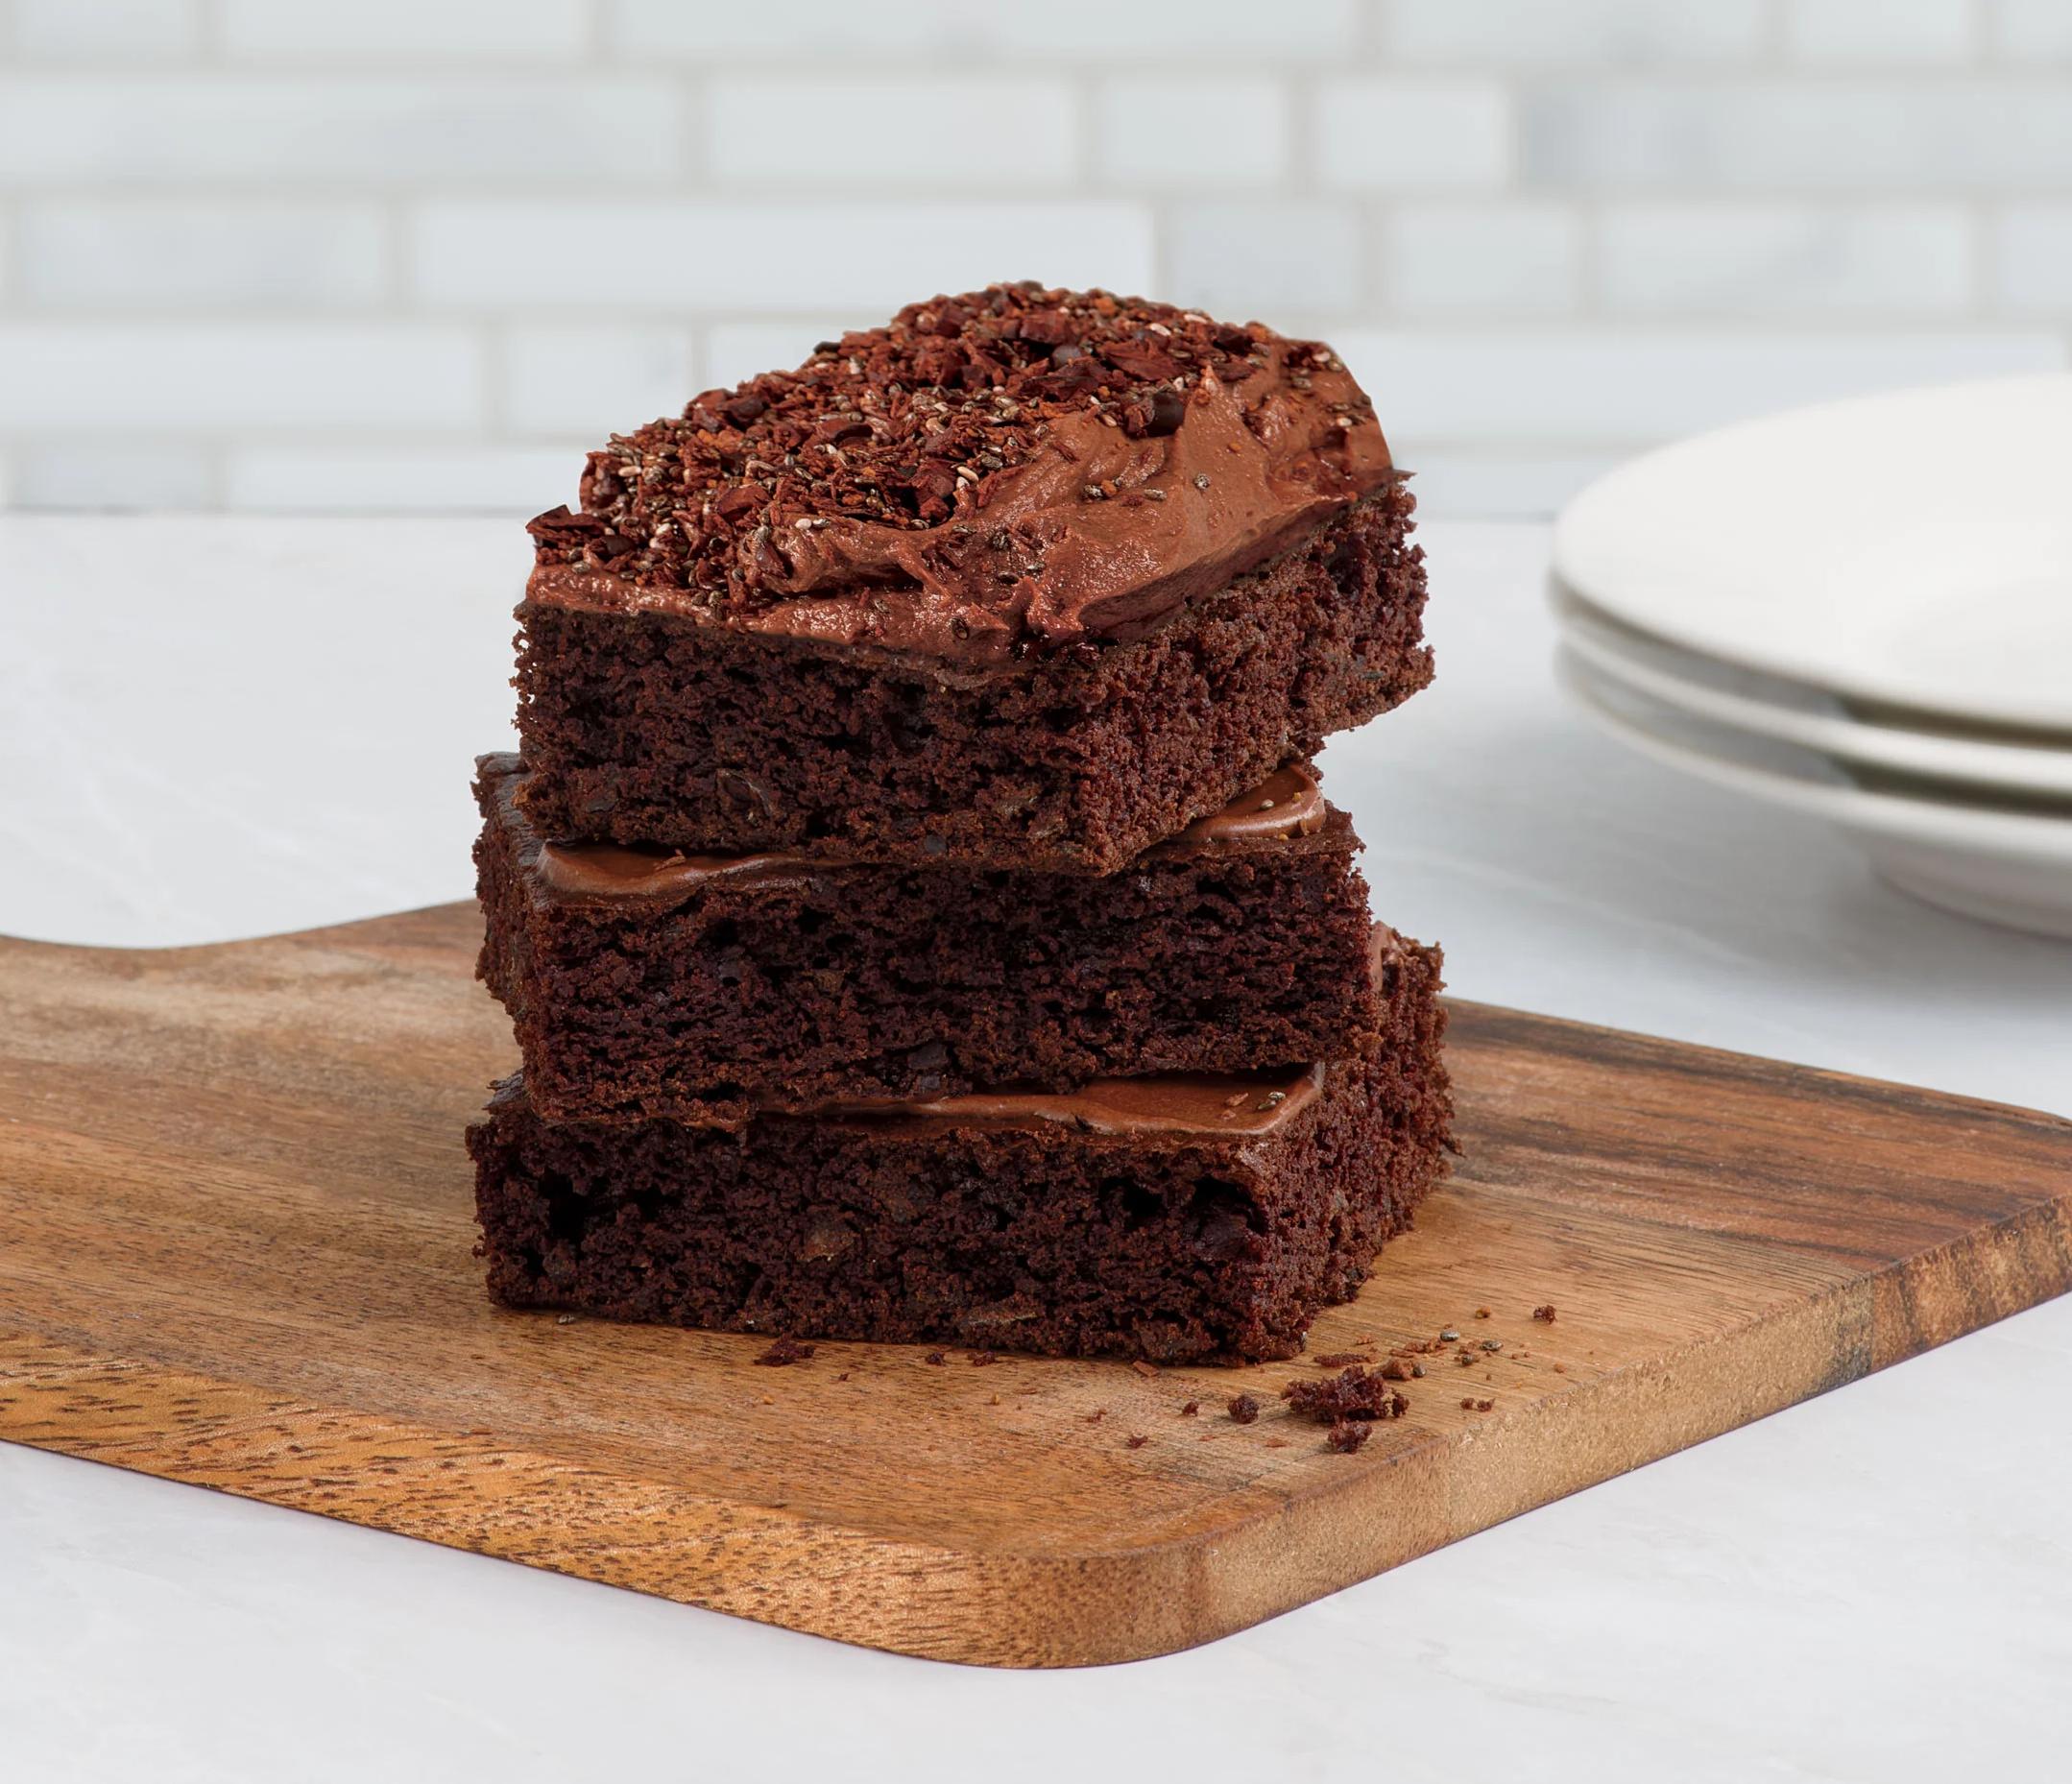  Perfectly crisp on the outside, gooey on the inside gluten-free brownies